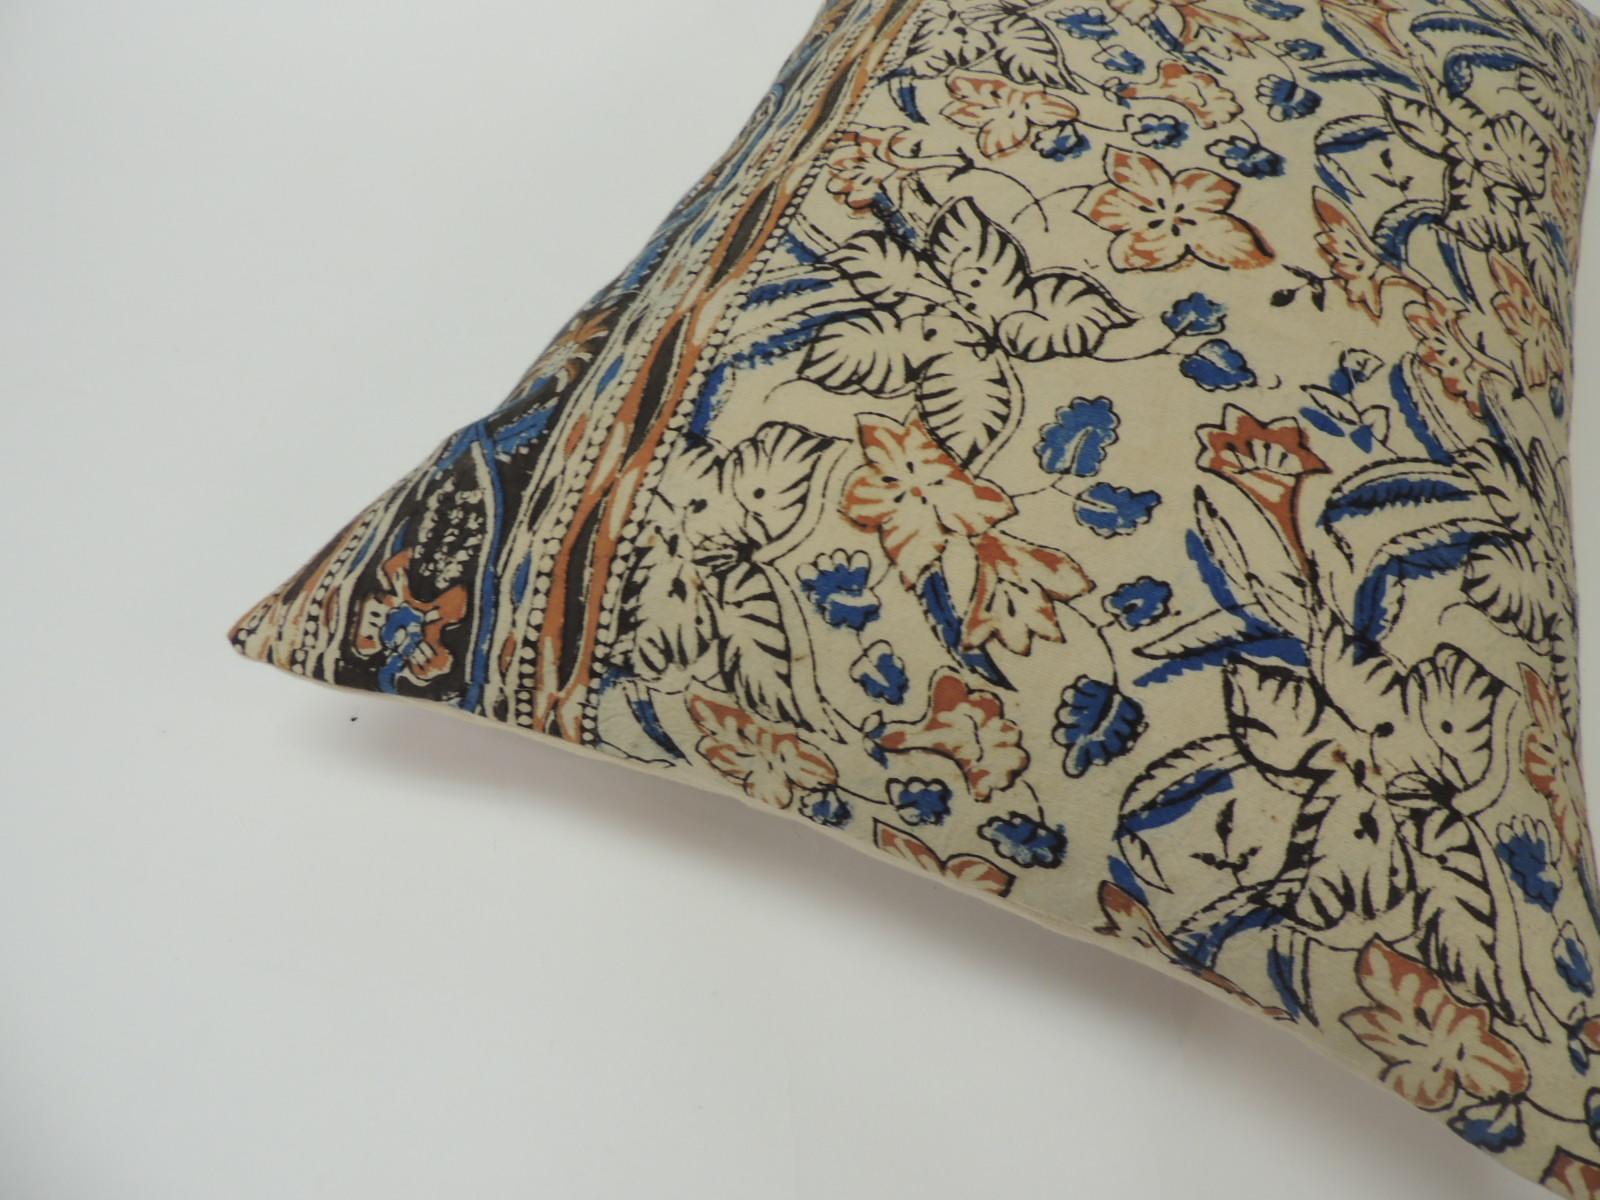 Hand-Crafted Vintage Indian Hand-Blocked Artisanal Textile Decorative Bolster Pillow